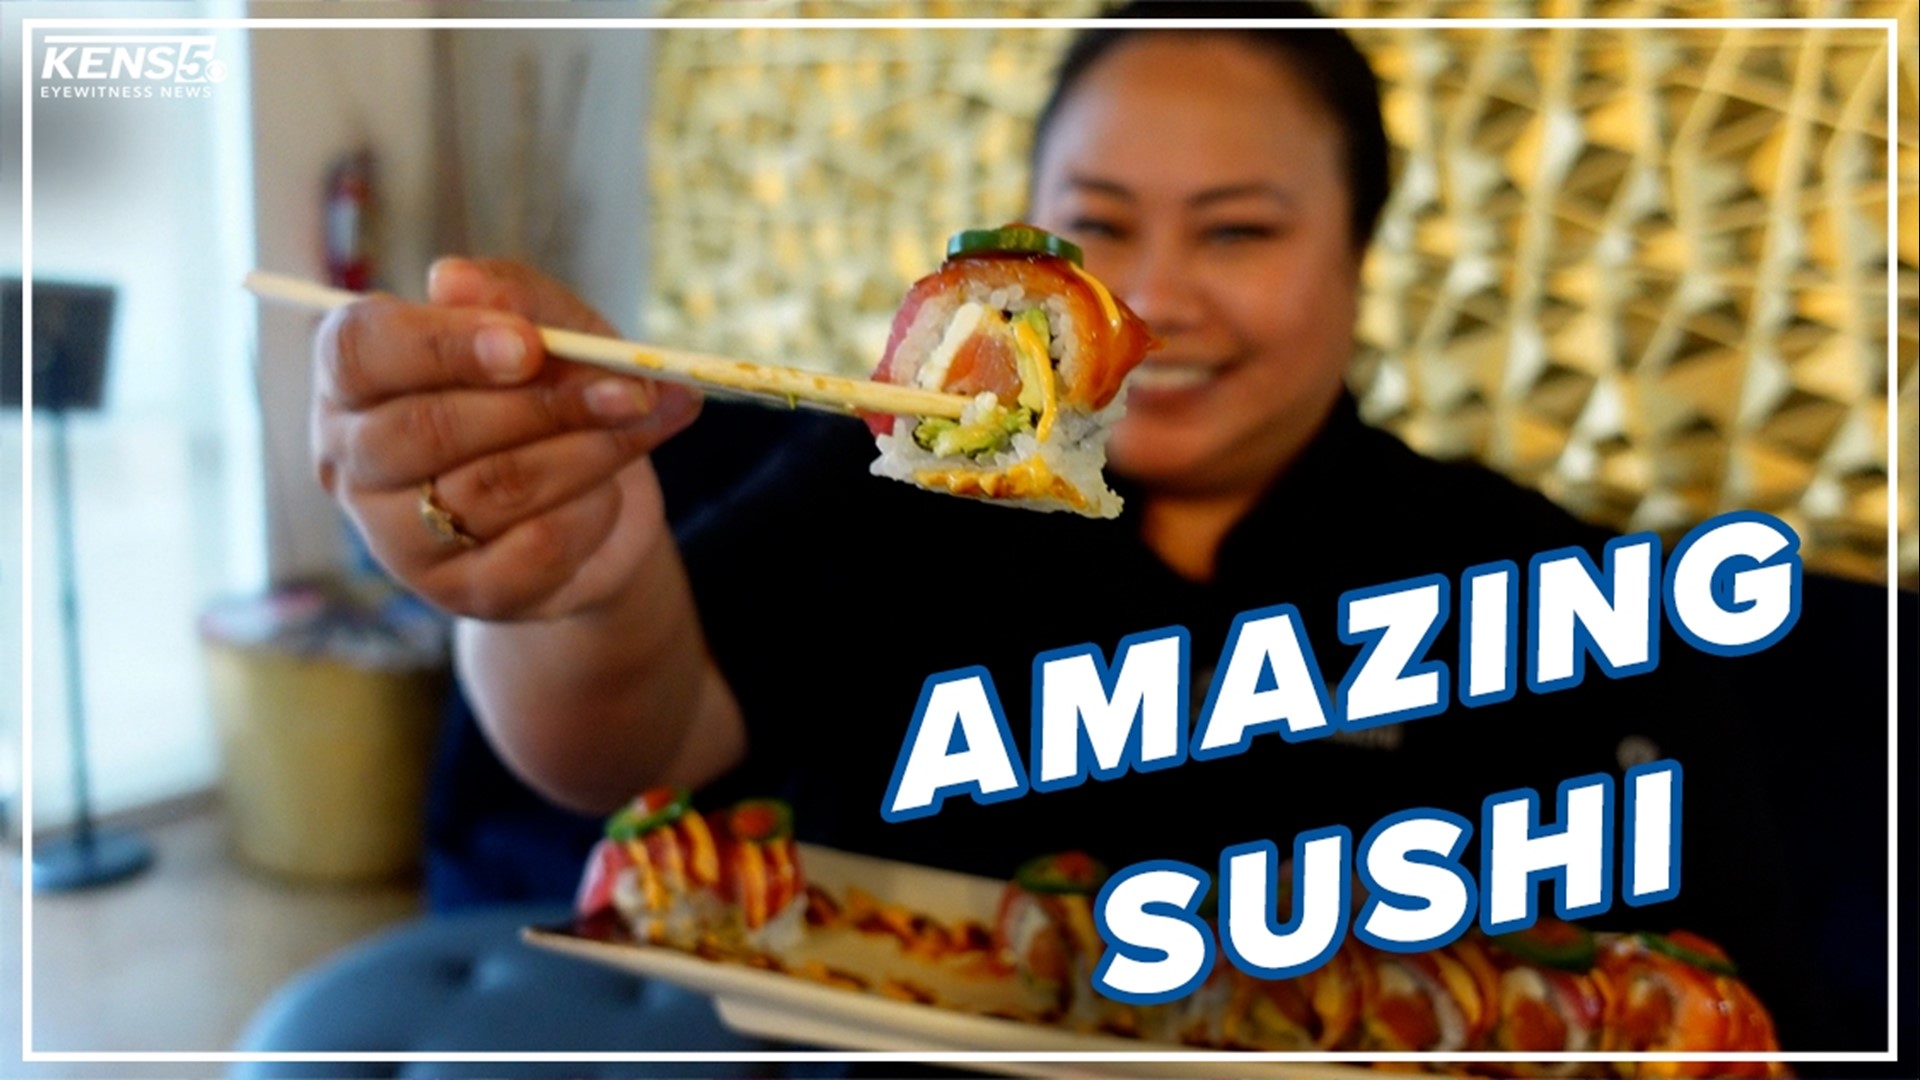 Their talents shine in their food, especially in the sushi.